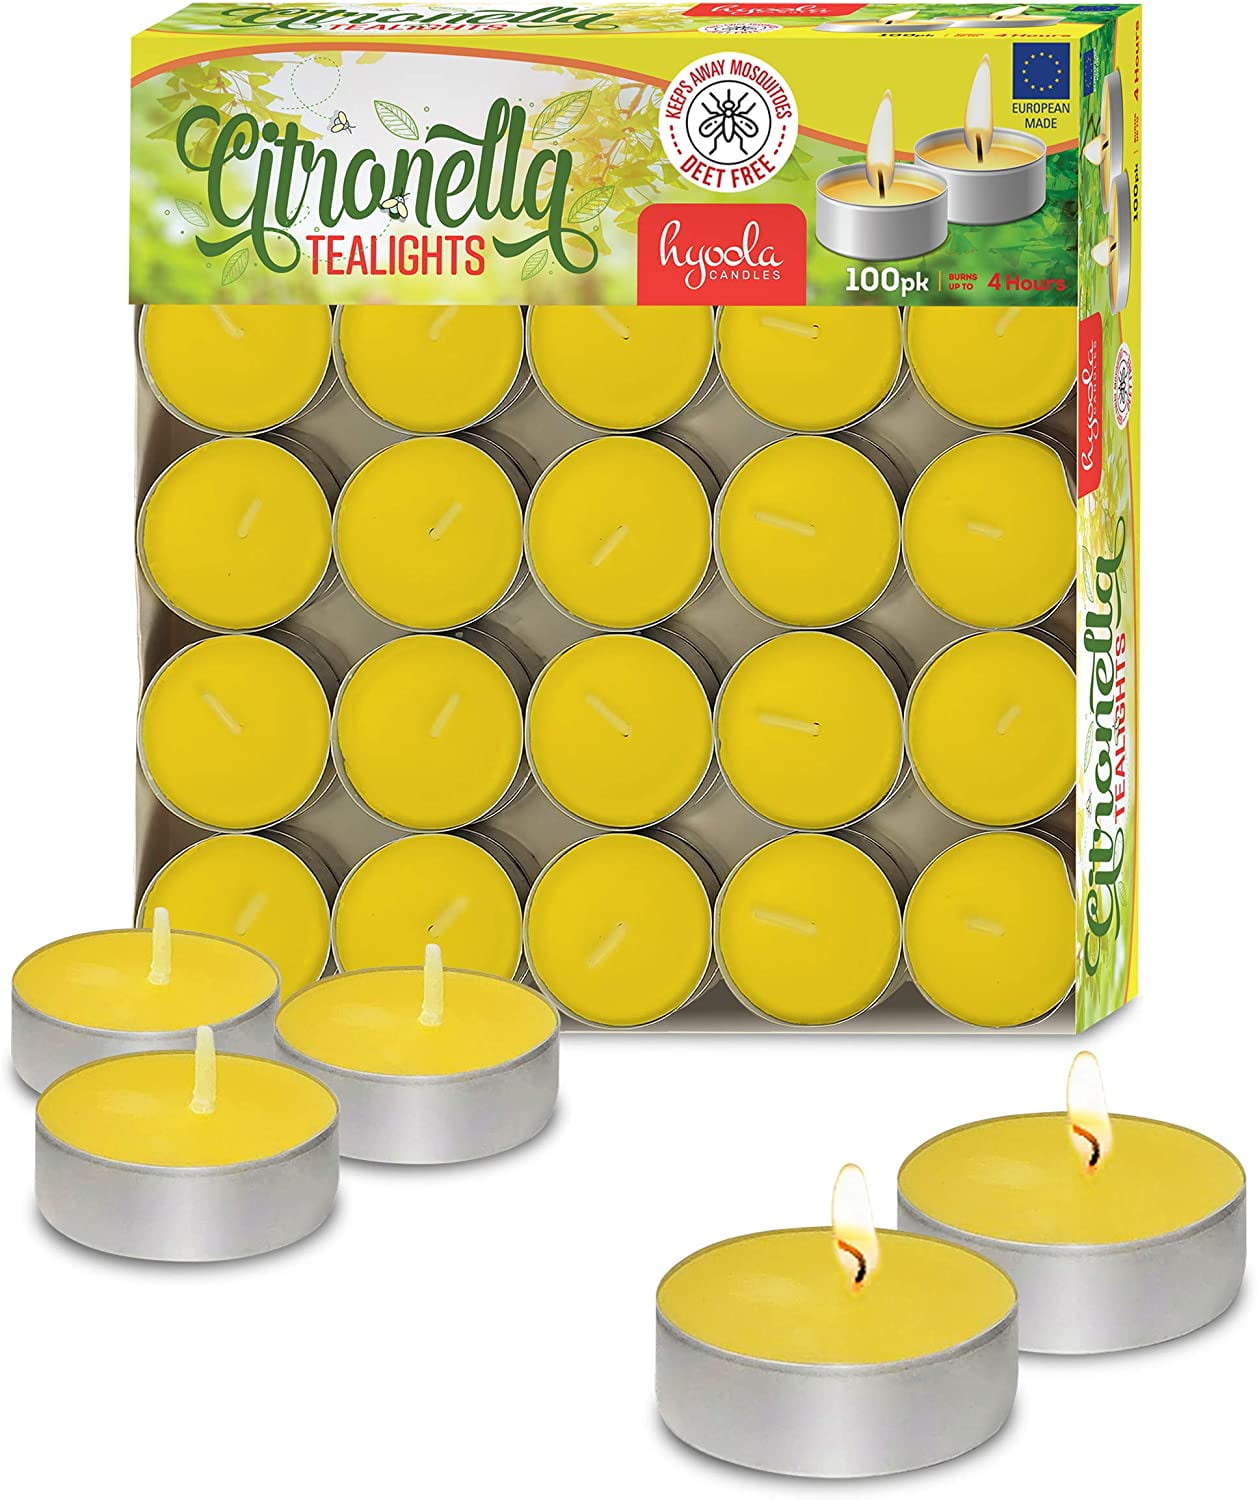 10pk PEARS & CITRONELLA Triple Scented TEA LIGHT CANDLES 60 hours/pack MOZZIE 